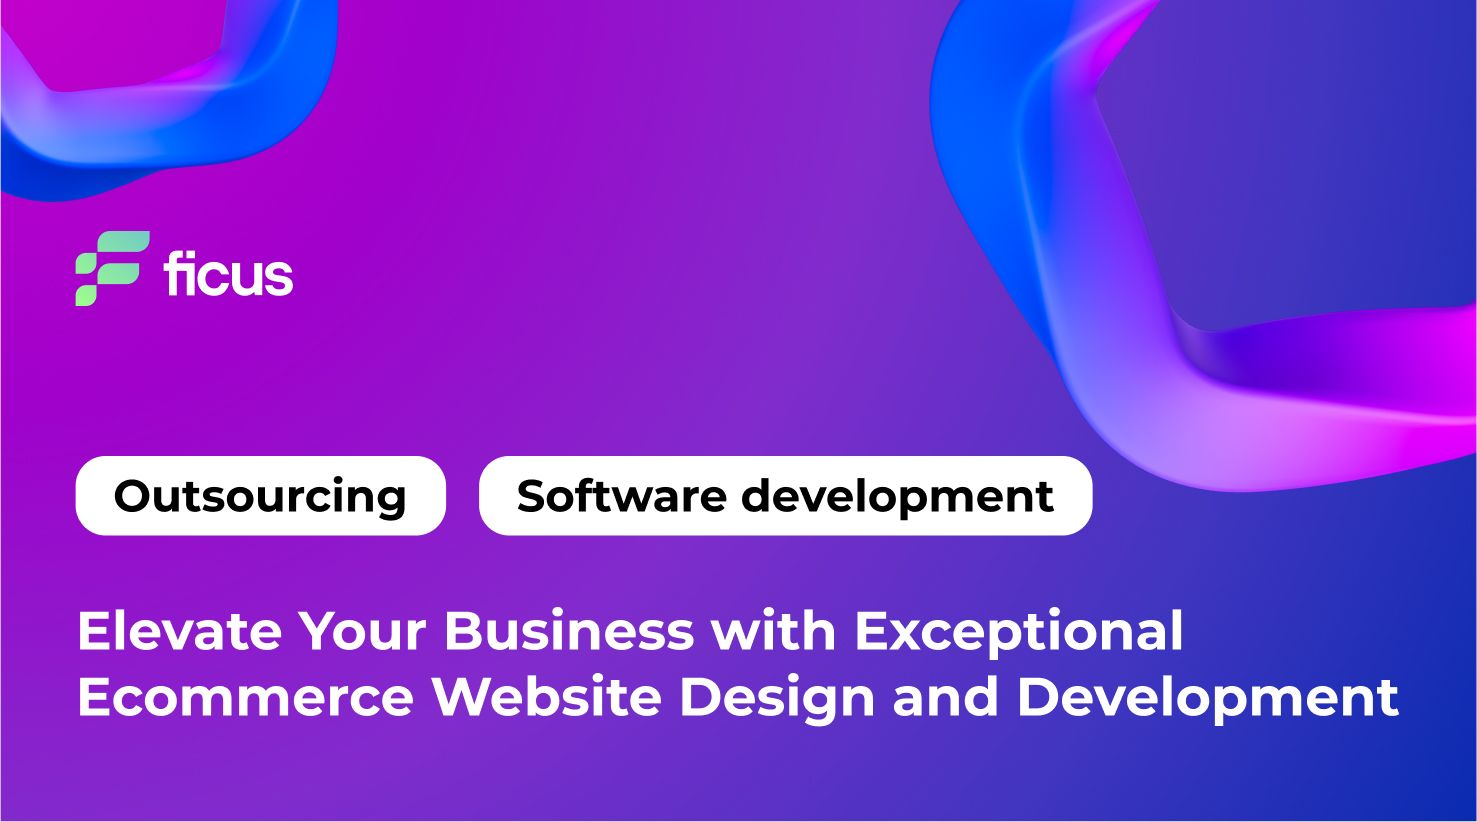 Elevate Your Business with Exceptional E-commerce Website Design and Development